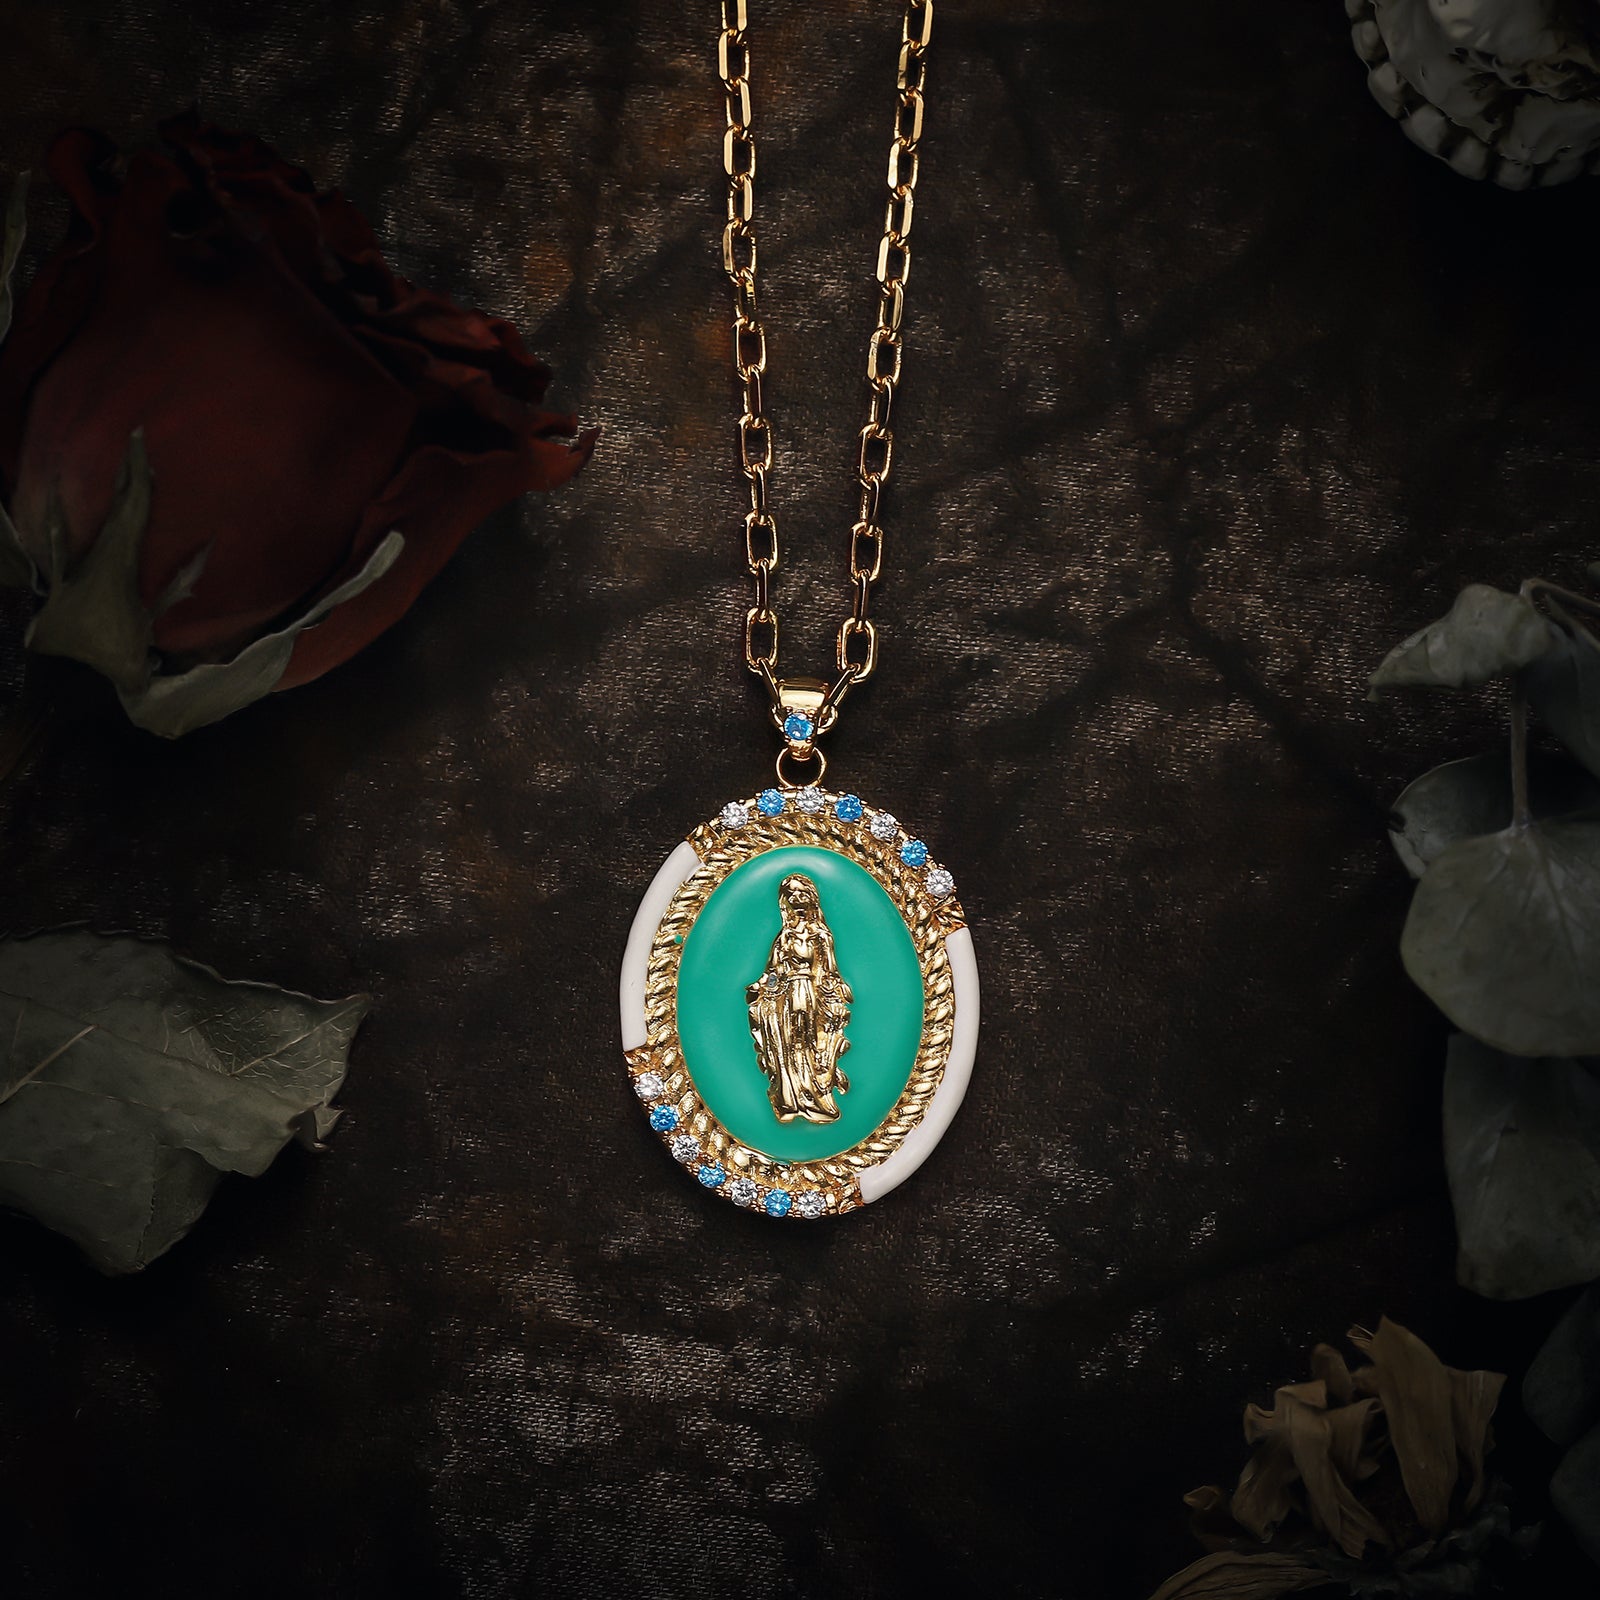 Grace Virgin Mother Mary Necklace